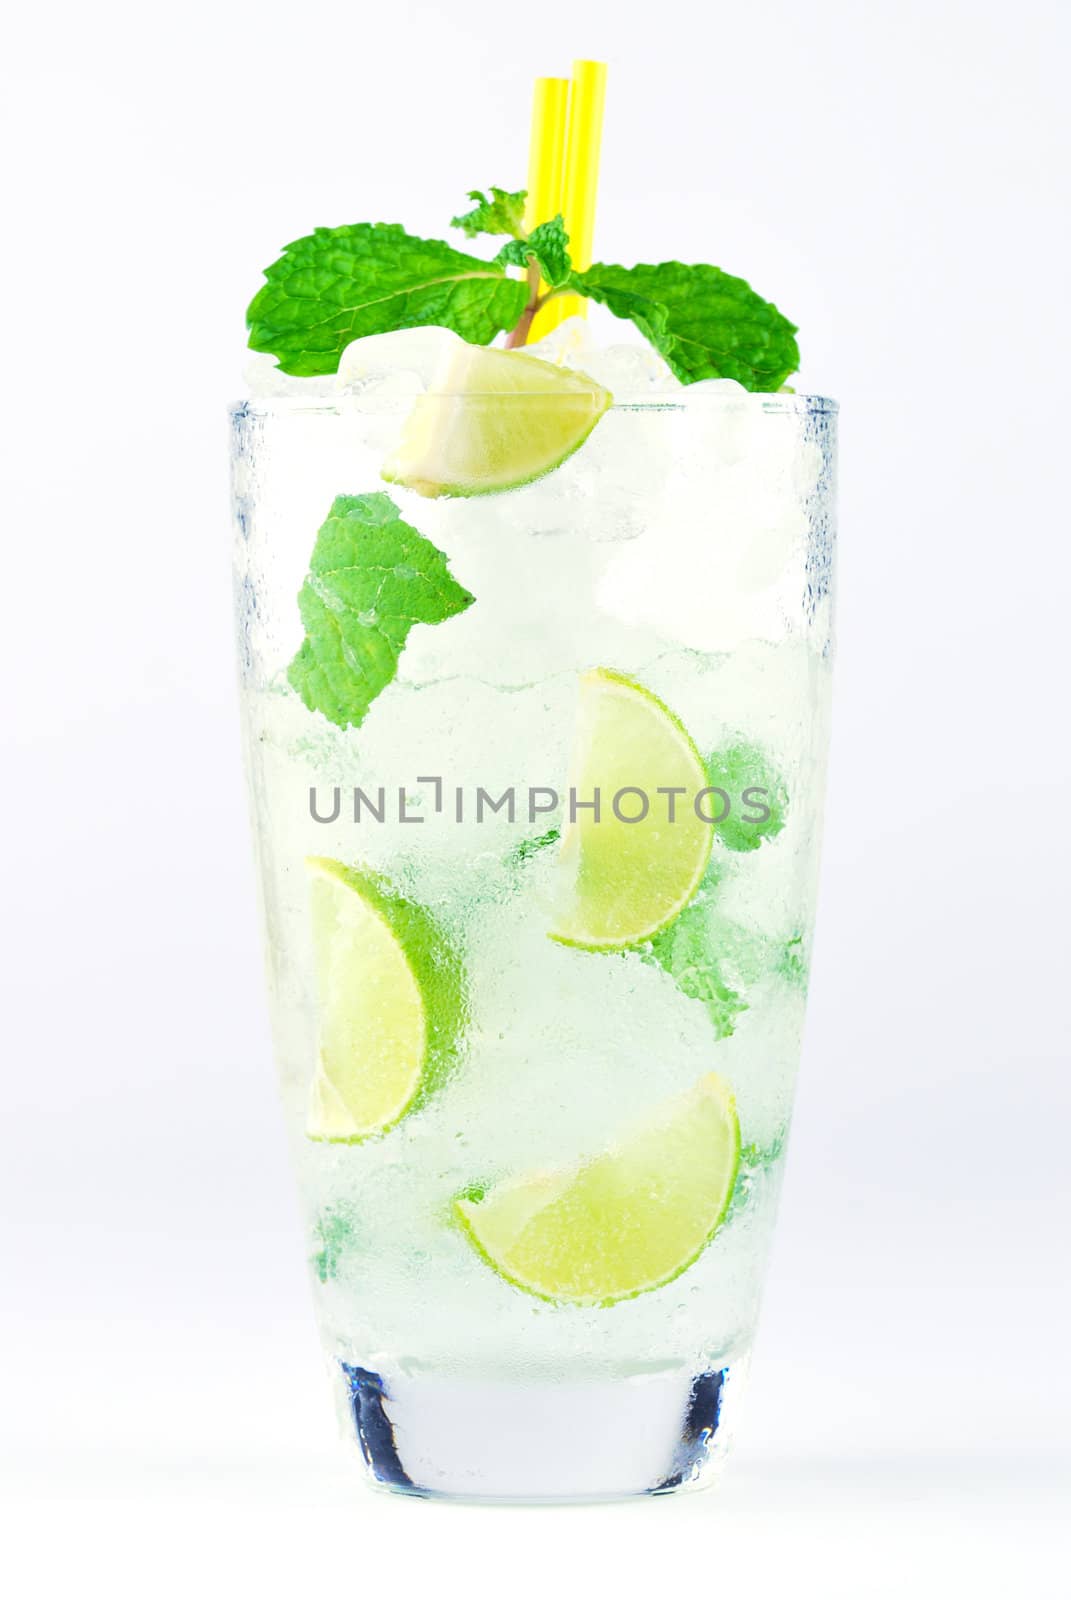 Mojito , lime pieces , leaves of mint with ice and rum  by teen00000